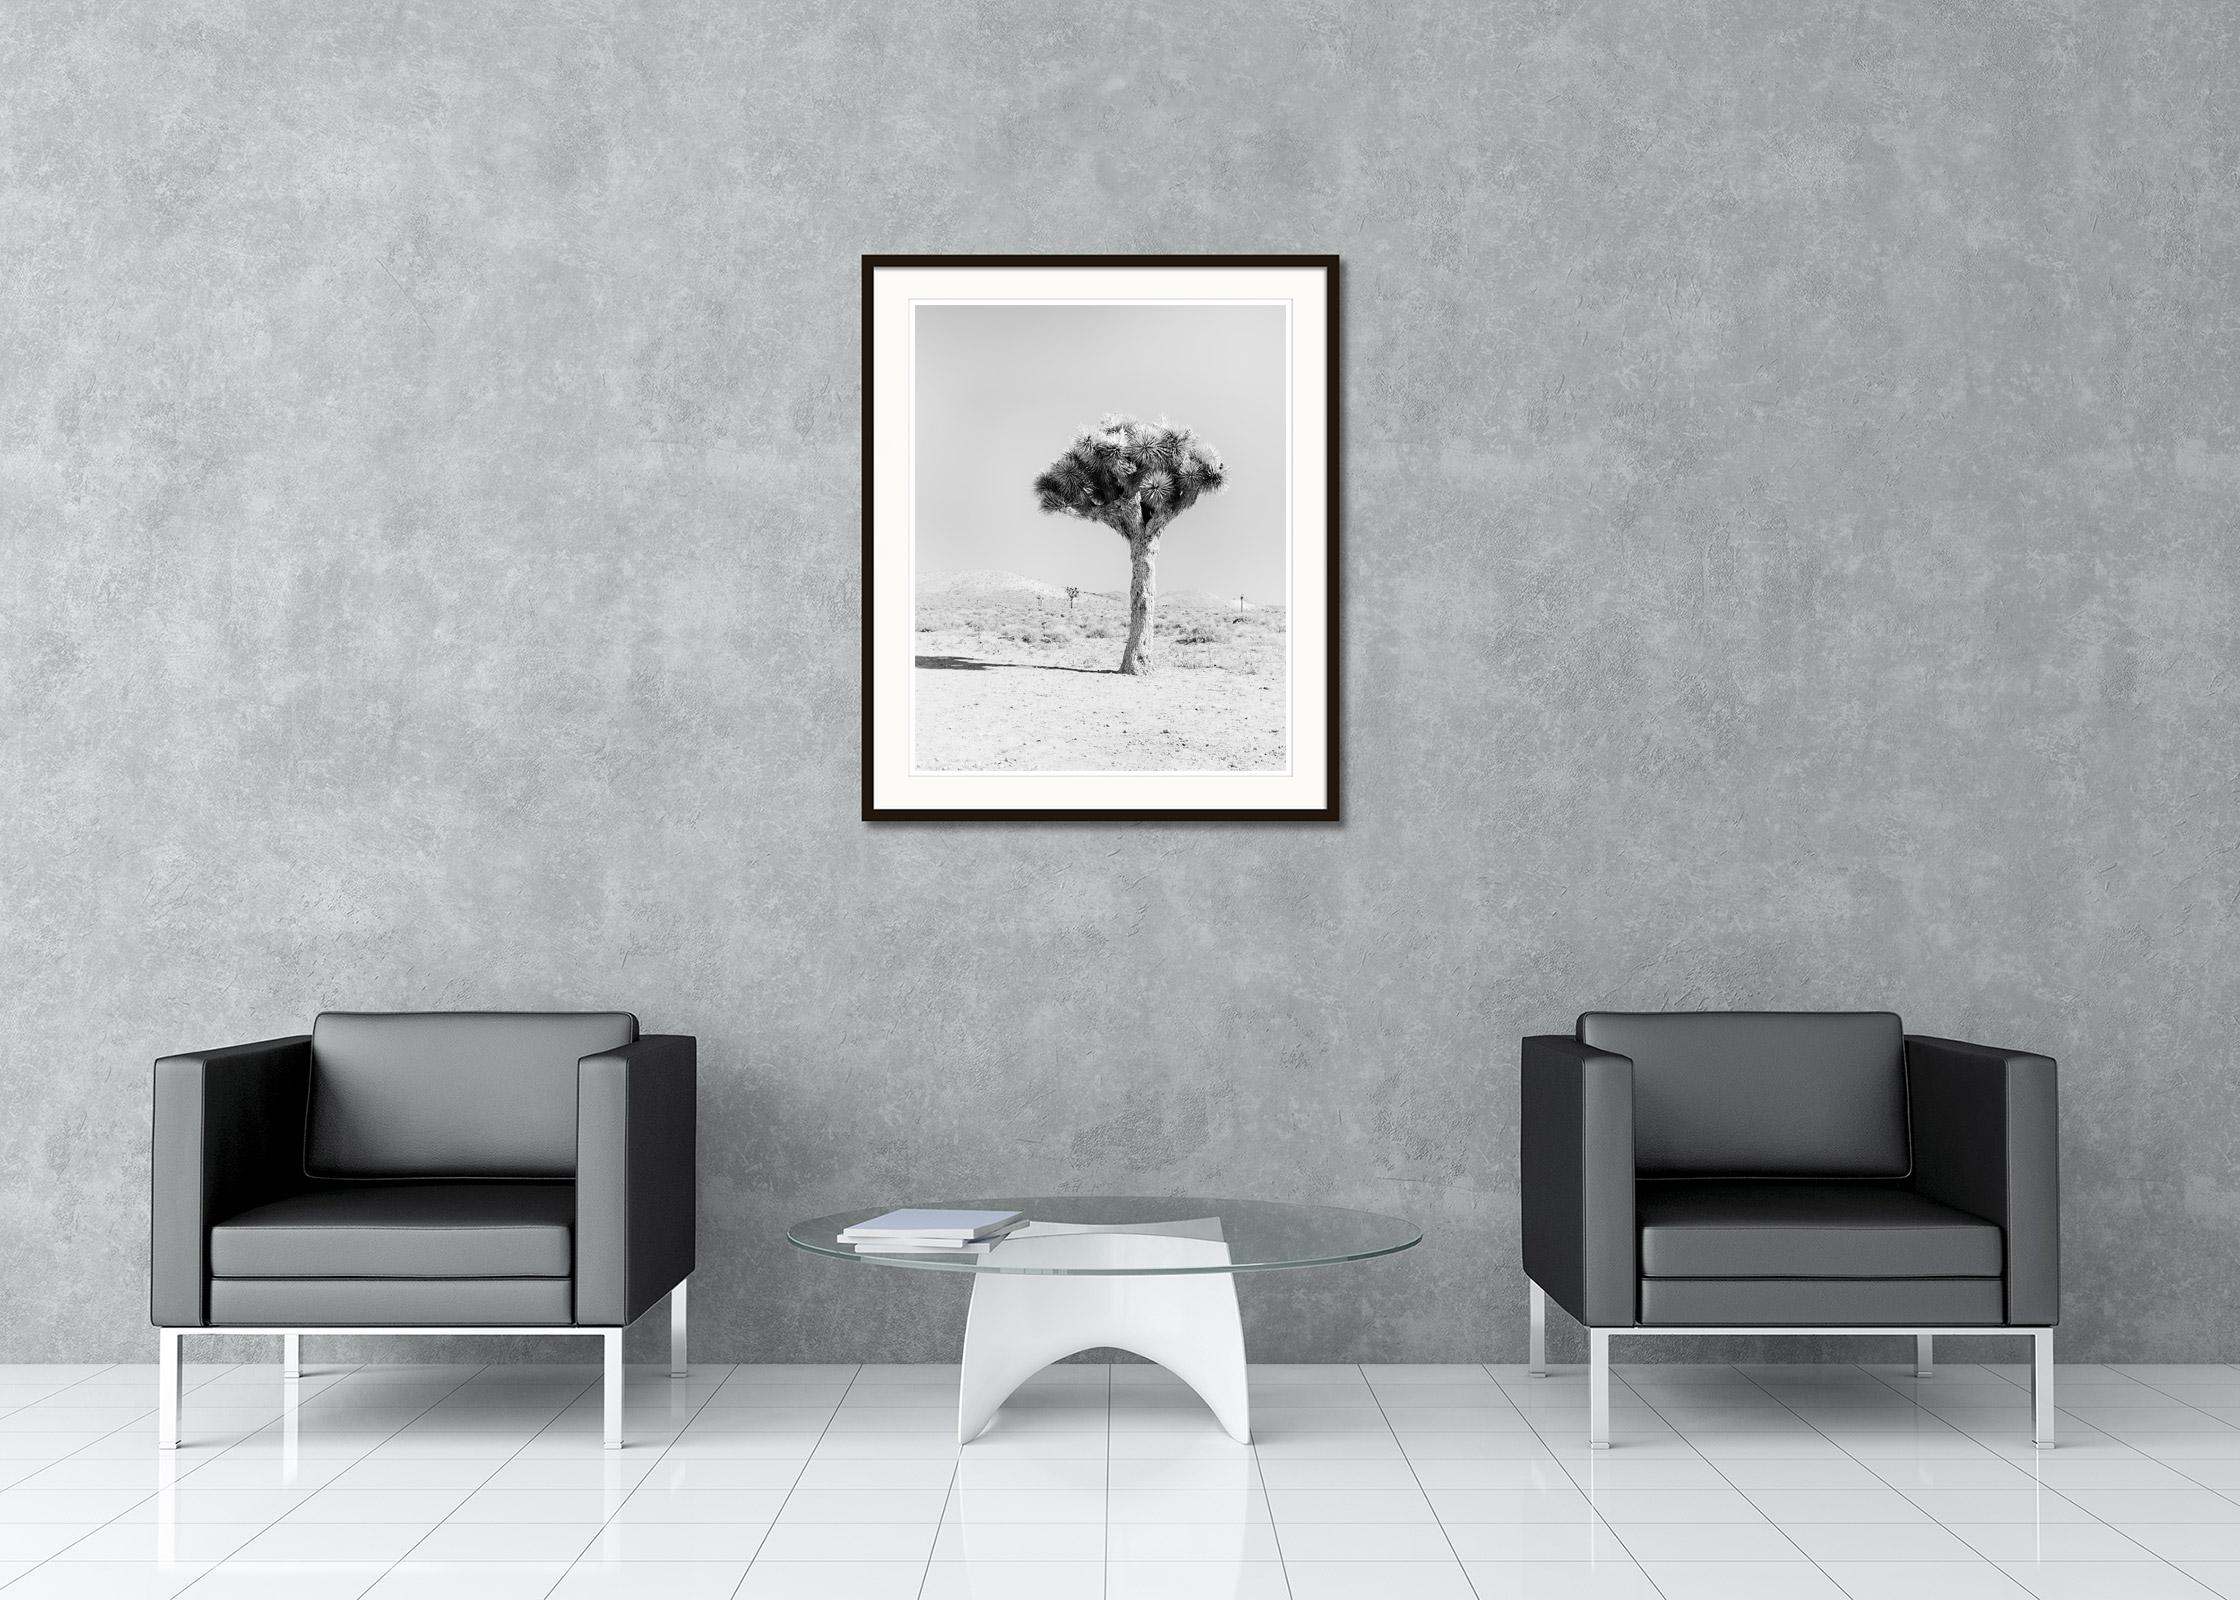 Black and White Fine Art Landscape Photography. Single Joshua Tree in the Mojave desert, California, USA. Archival pigment ink print, edition of 7. Signed, titled, dated and numbered by artist. Certificate of authenticity included. Printed with 4cm